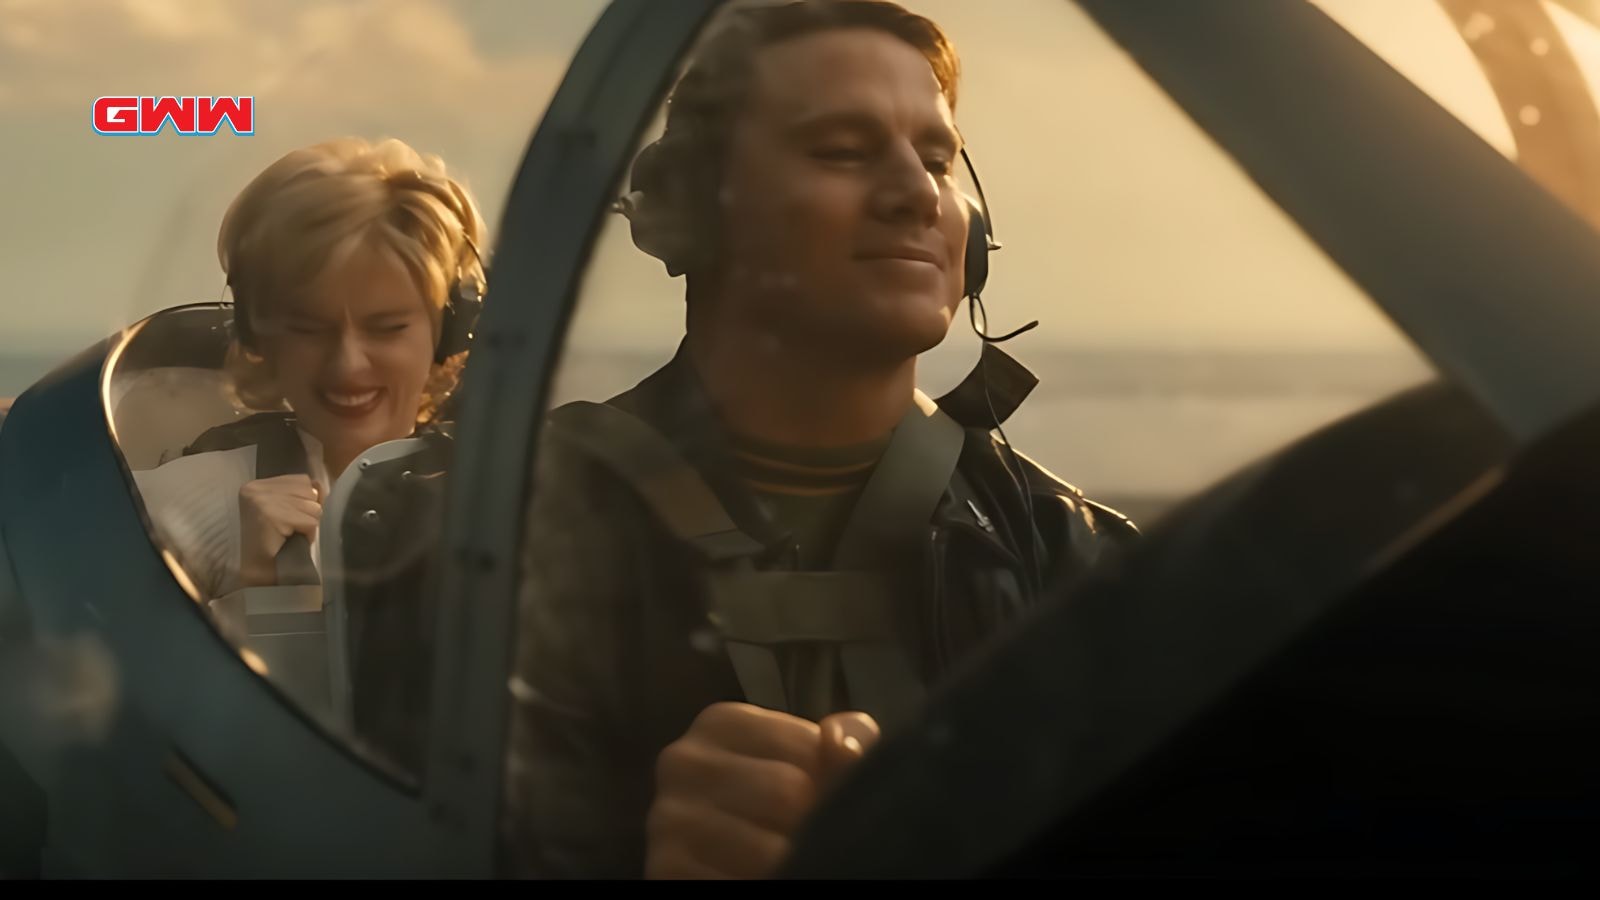 Cole and Kelly smiling in a small airplane cockpit, enjoying their flight together.